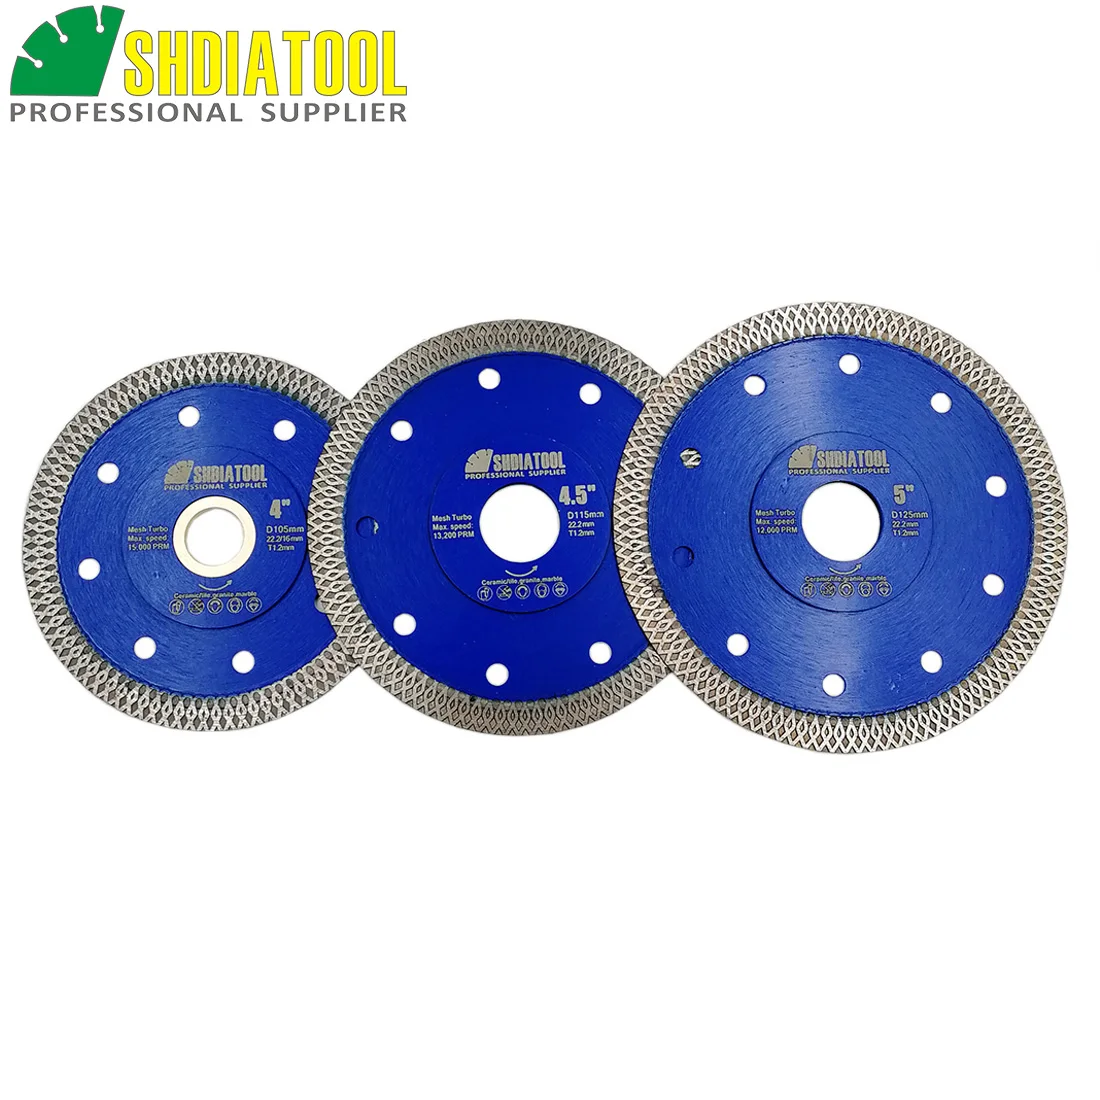 4 105mm Diamond Saw Blade Cutting Disc Cutter For Granite Marble Ceramic Tile S 